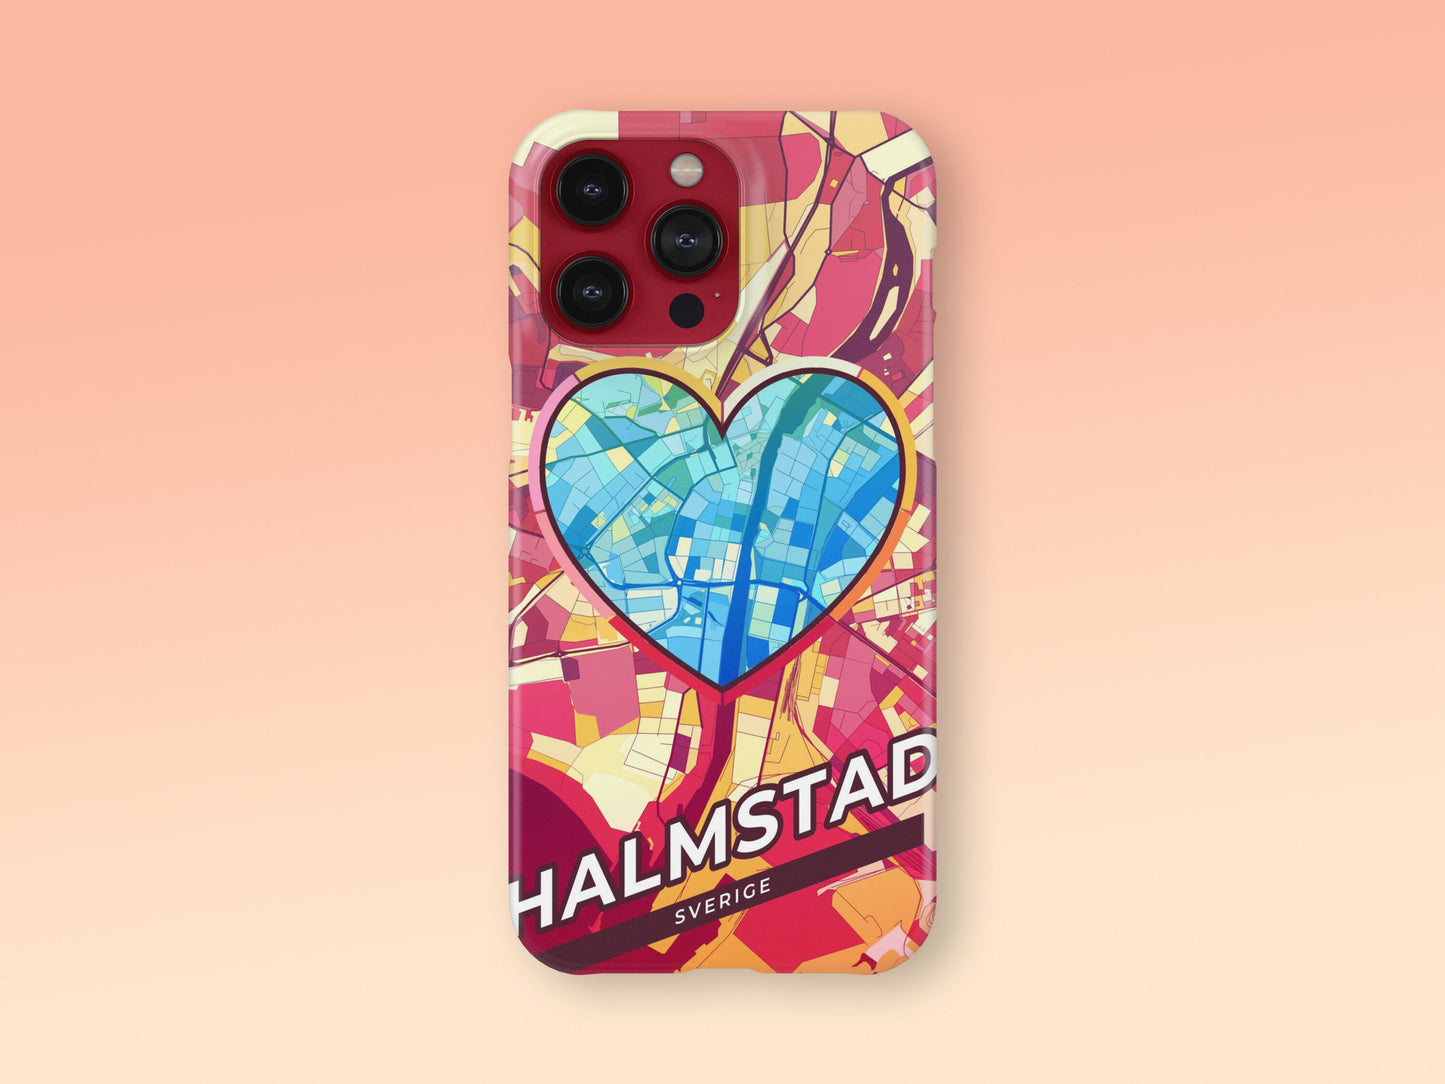 Halmstad Sweden slim phone case with colorful icon. Birthday, wedding or housewarming gift. Couple match cases. 2